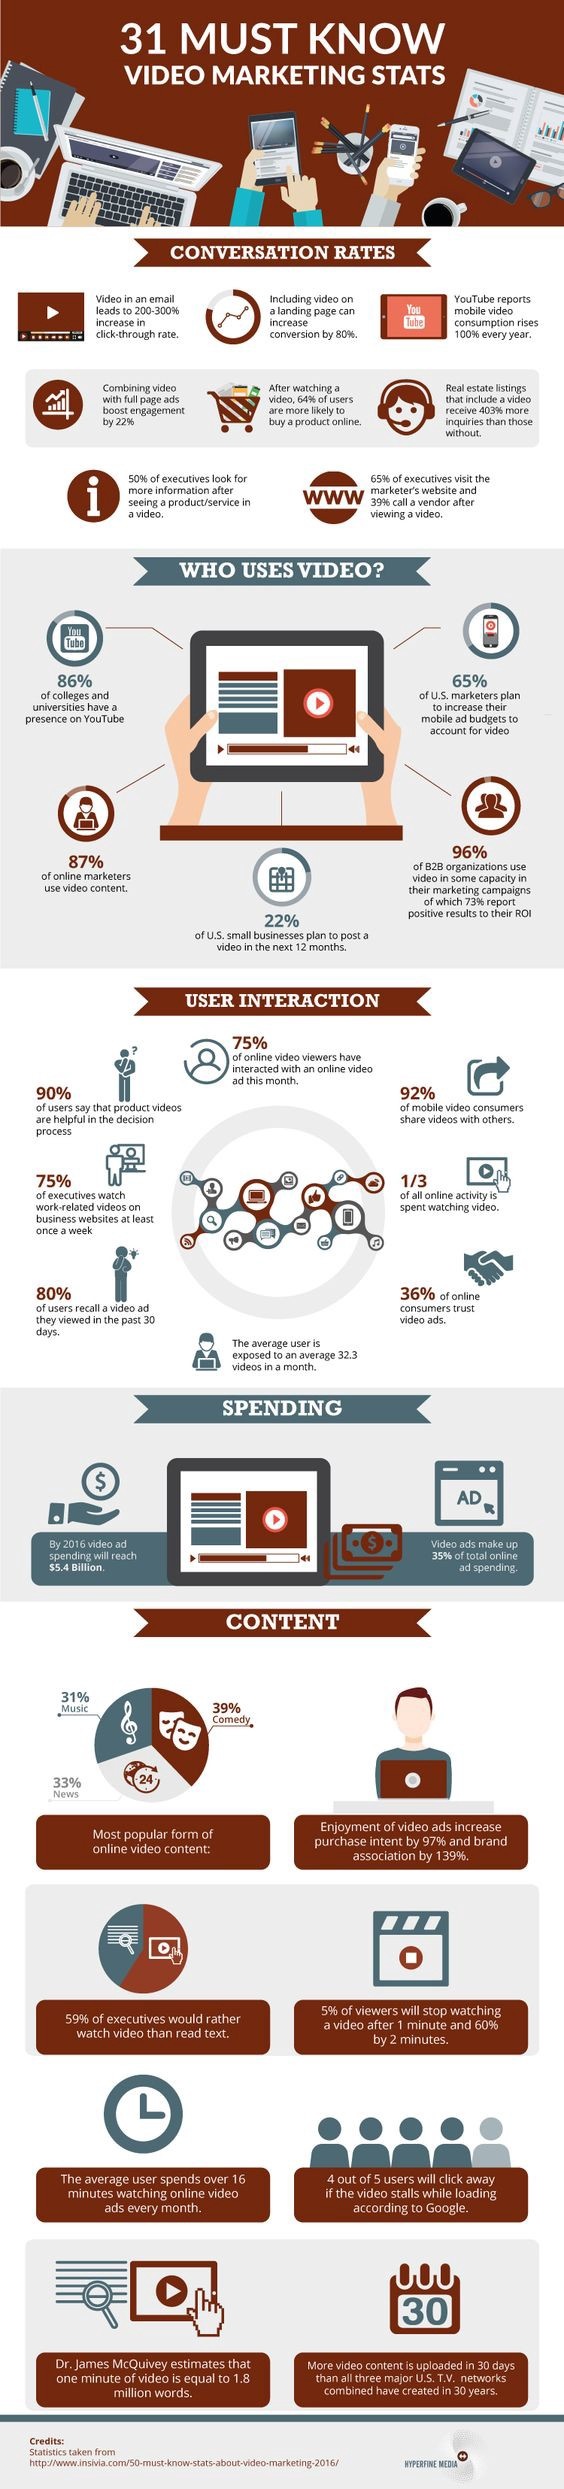 video marketing facts infographic.jpg